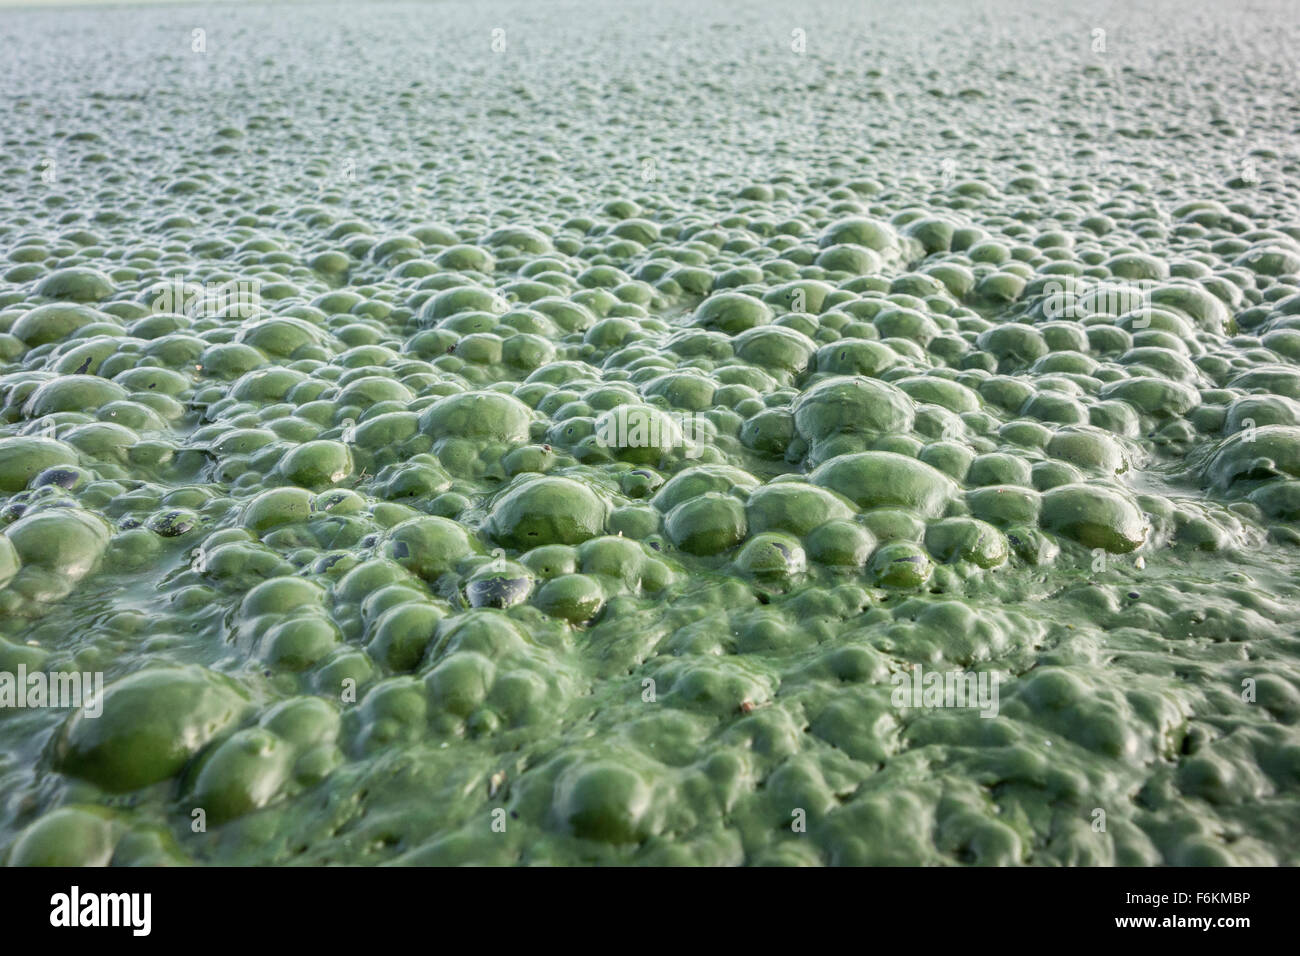 Algal Mat High Resolution Stock Photography and Images - Alamy